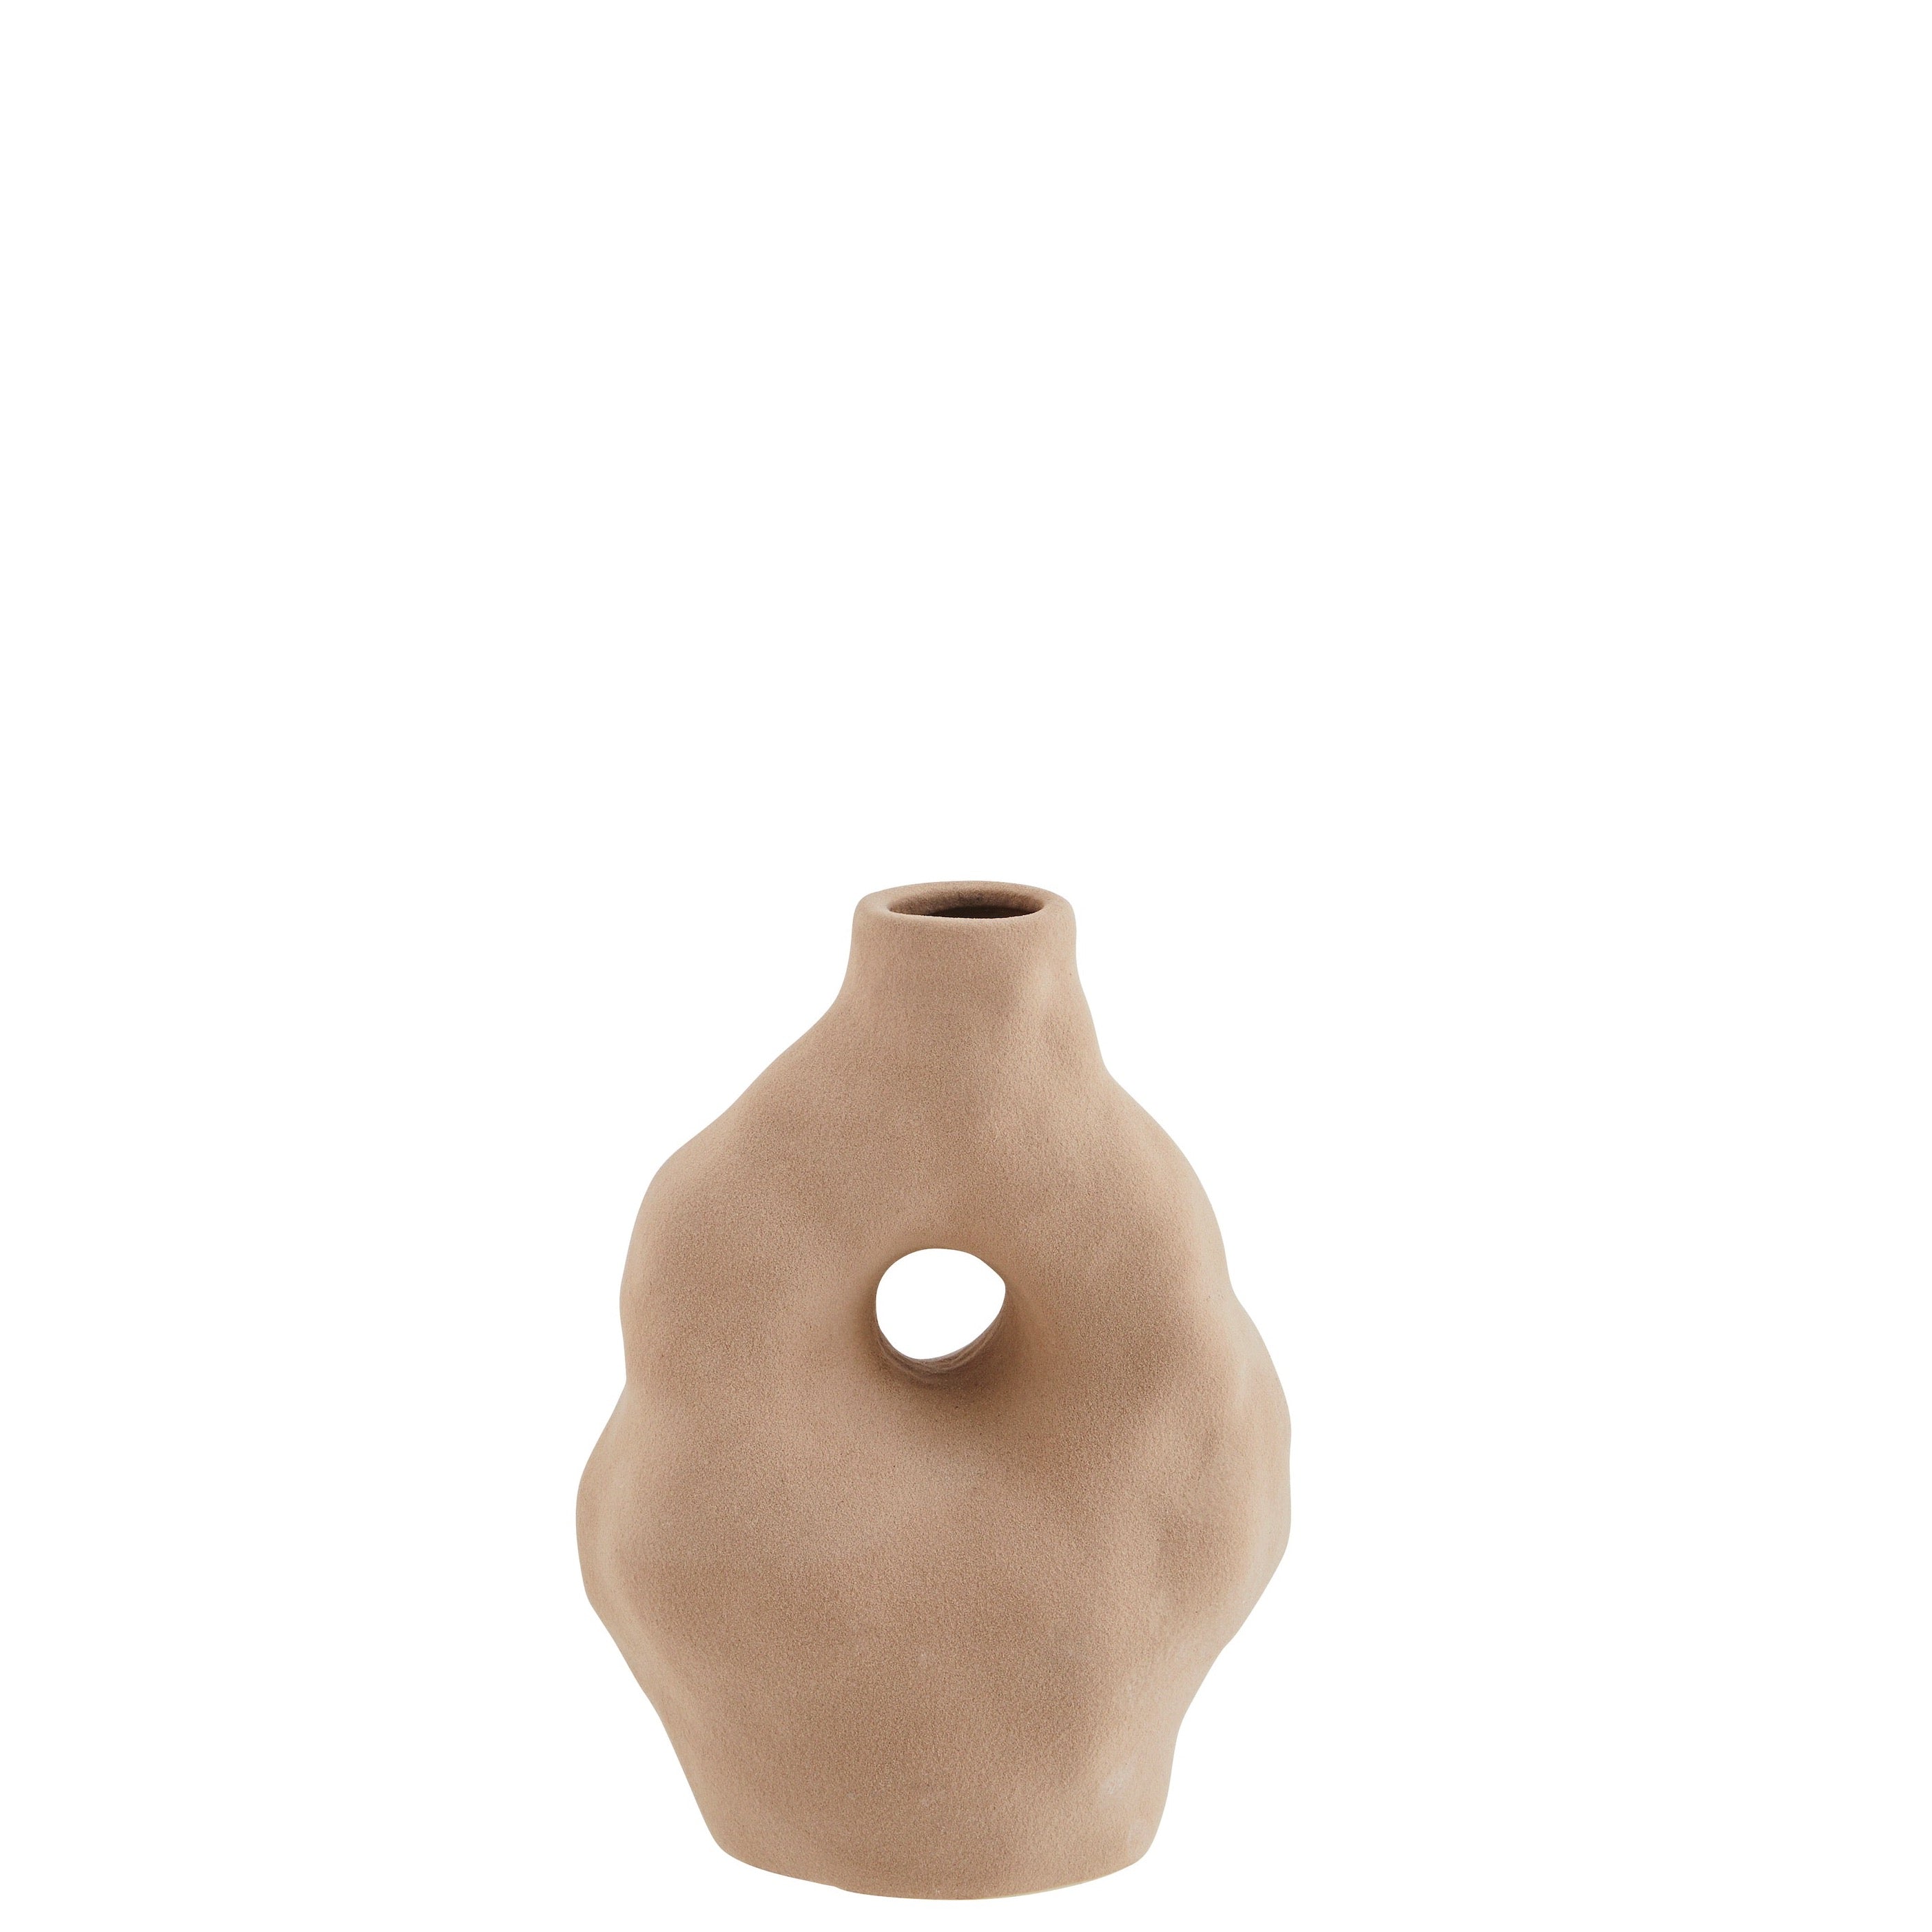 Irregular shaped vase with a narrow opening and a hole in the middle. This vase is sandstone in colour with a textured matt finish.